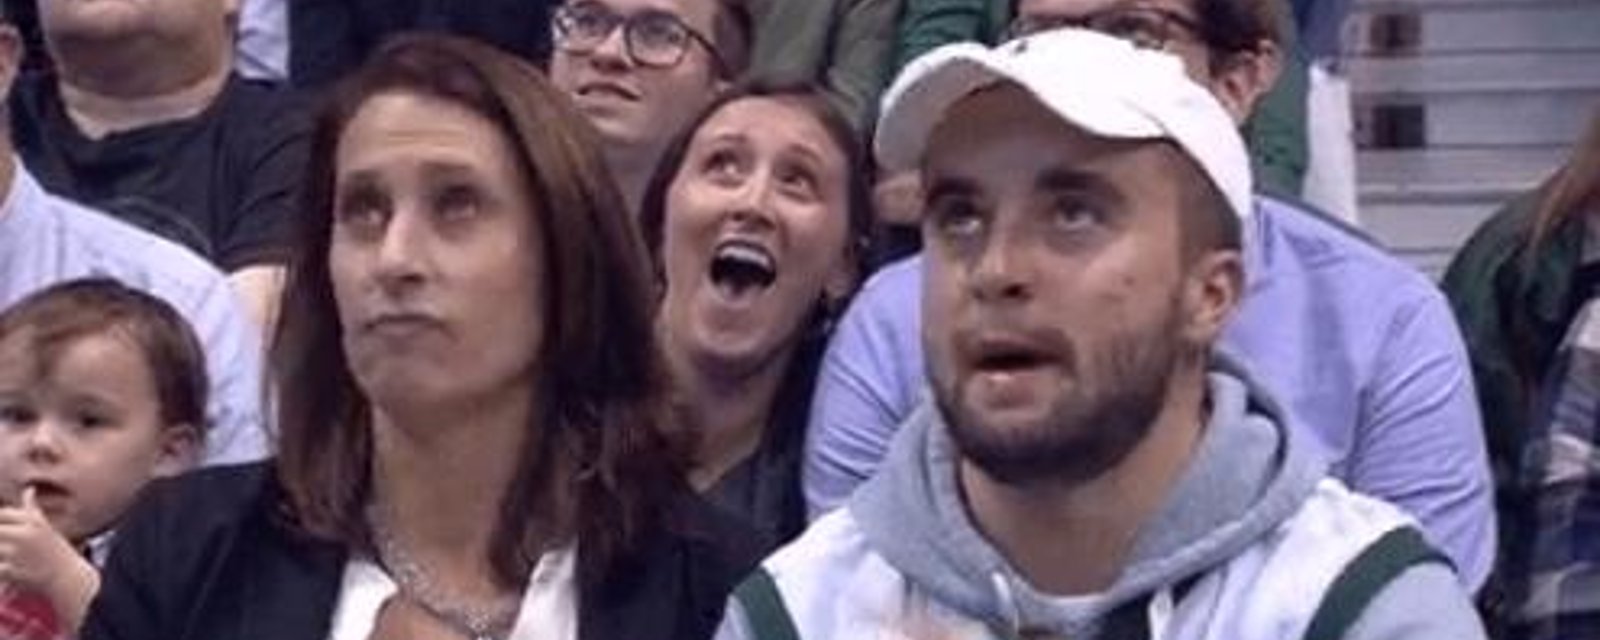 Awkward moments as mom and son are showed on kiss cam! 